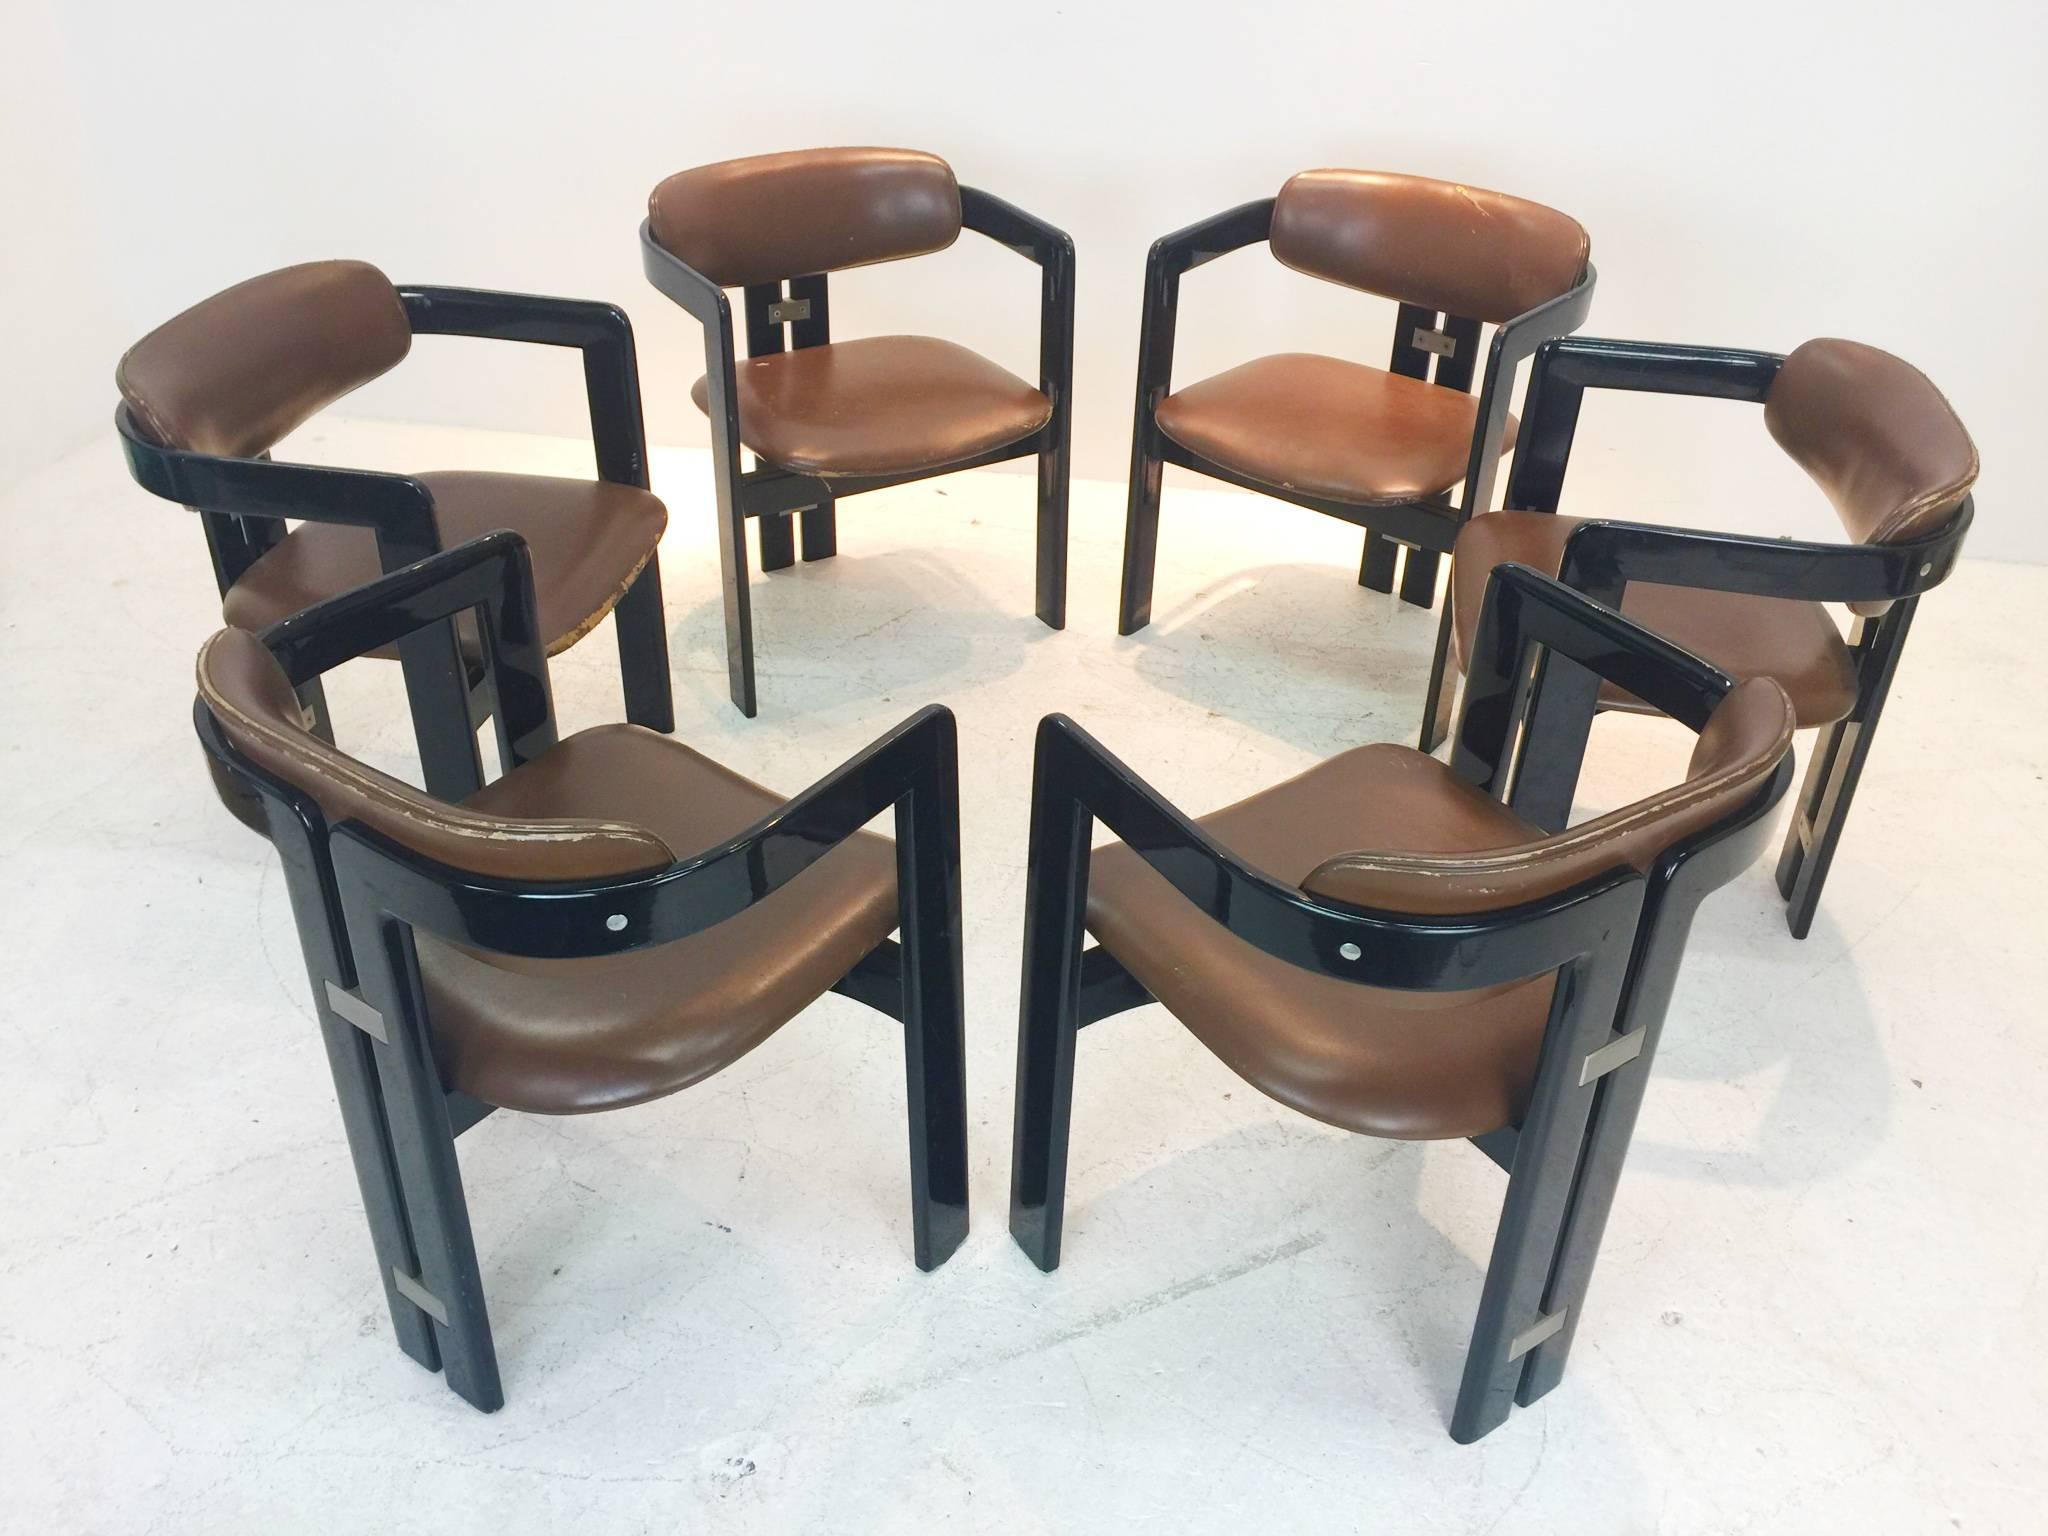 Set of six black lacquer Pamplona chair by Augusto Savini for Pozzi. New upholstery and lacquer recommended.